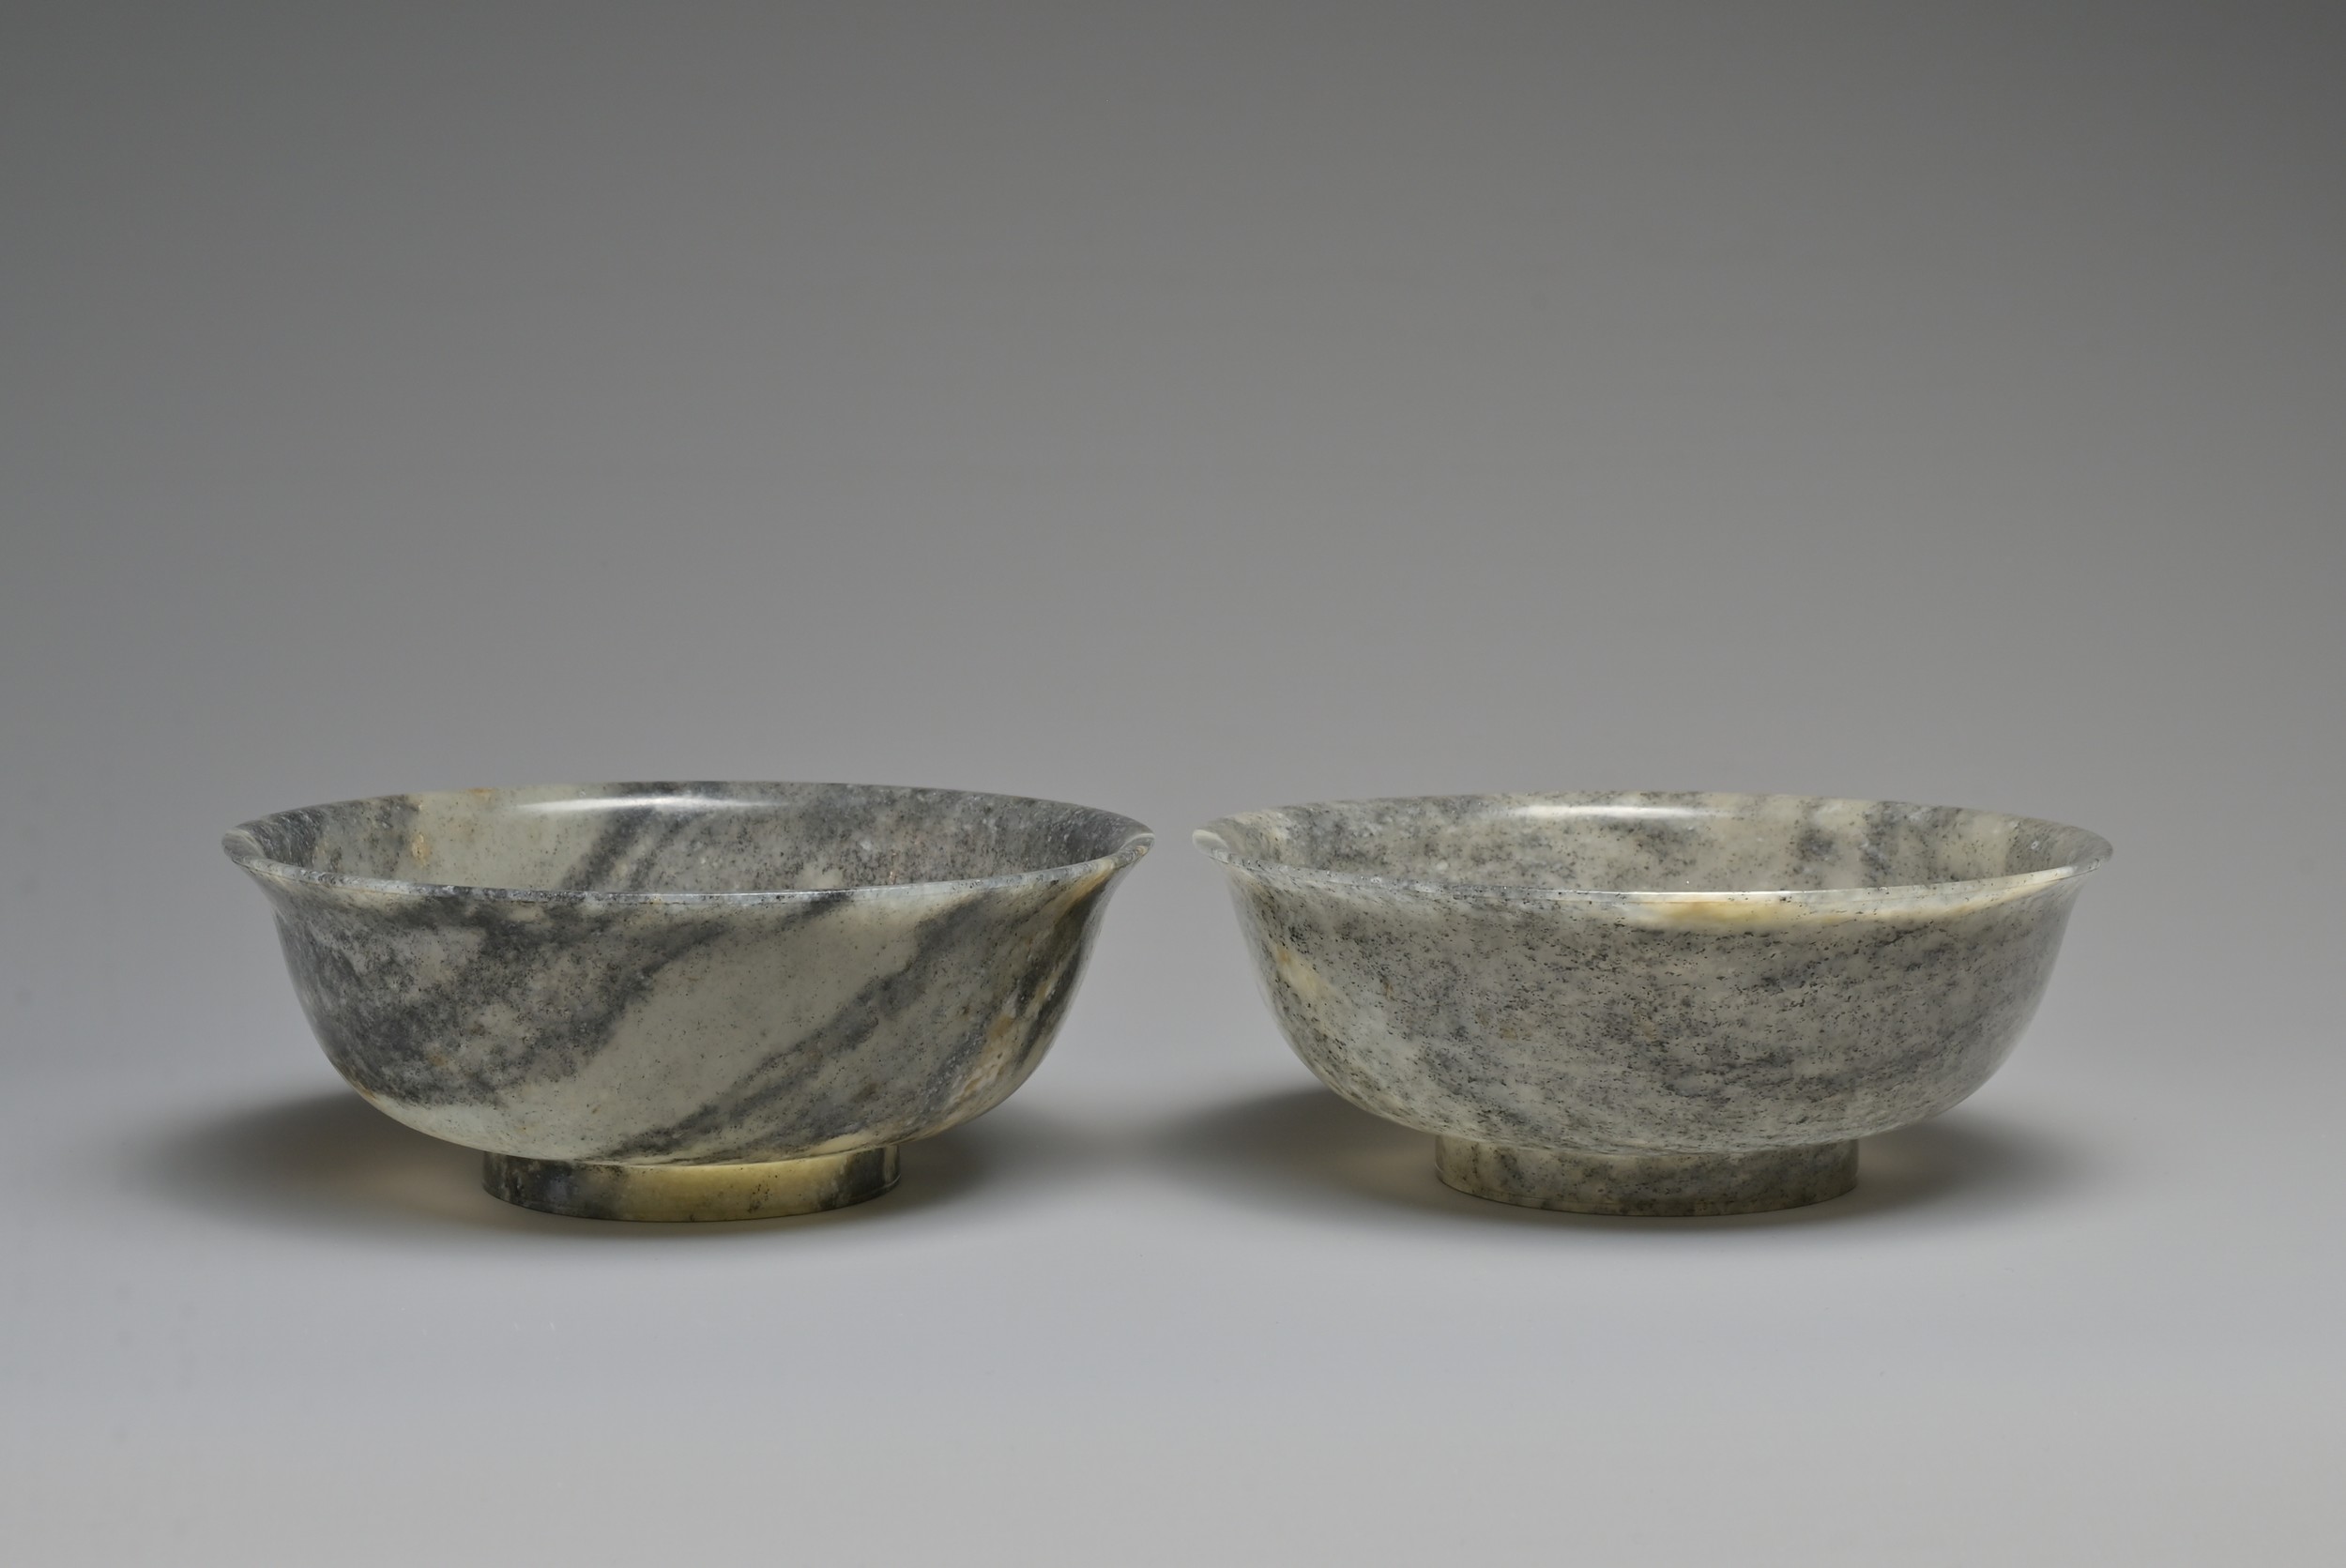 A FINE AND RARE PAIR OF CHINESE BLACK AND WHITE STRIATED NEPHRITE JADE BOWLS, 18/19TH CENTURY. - Image 2 of 32